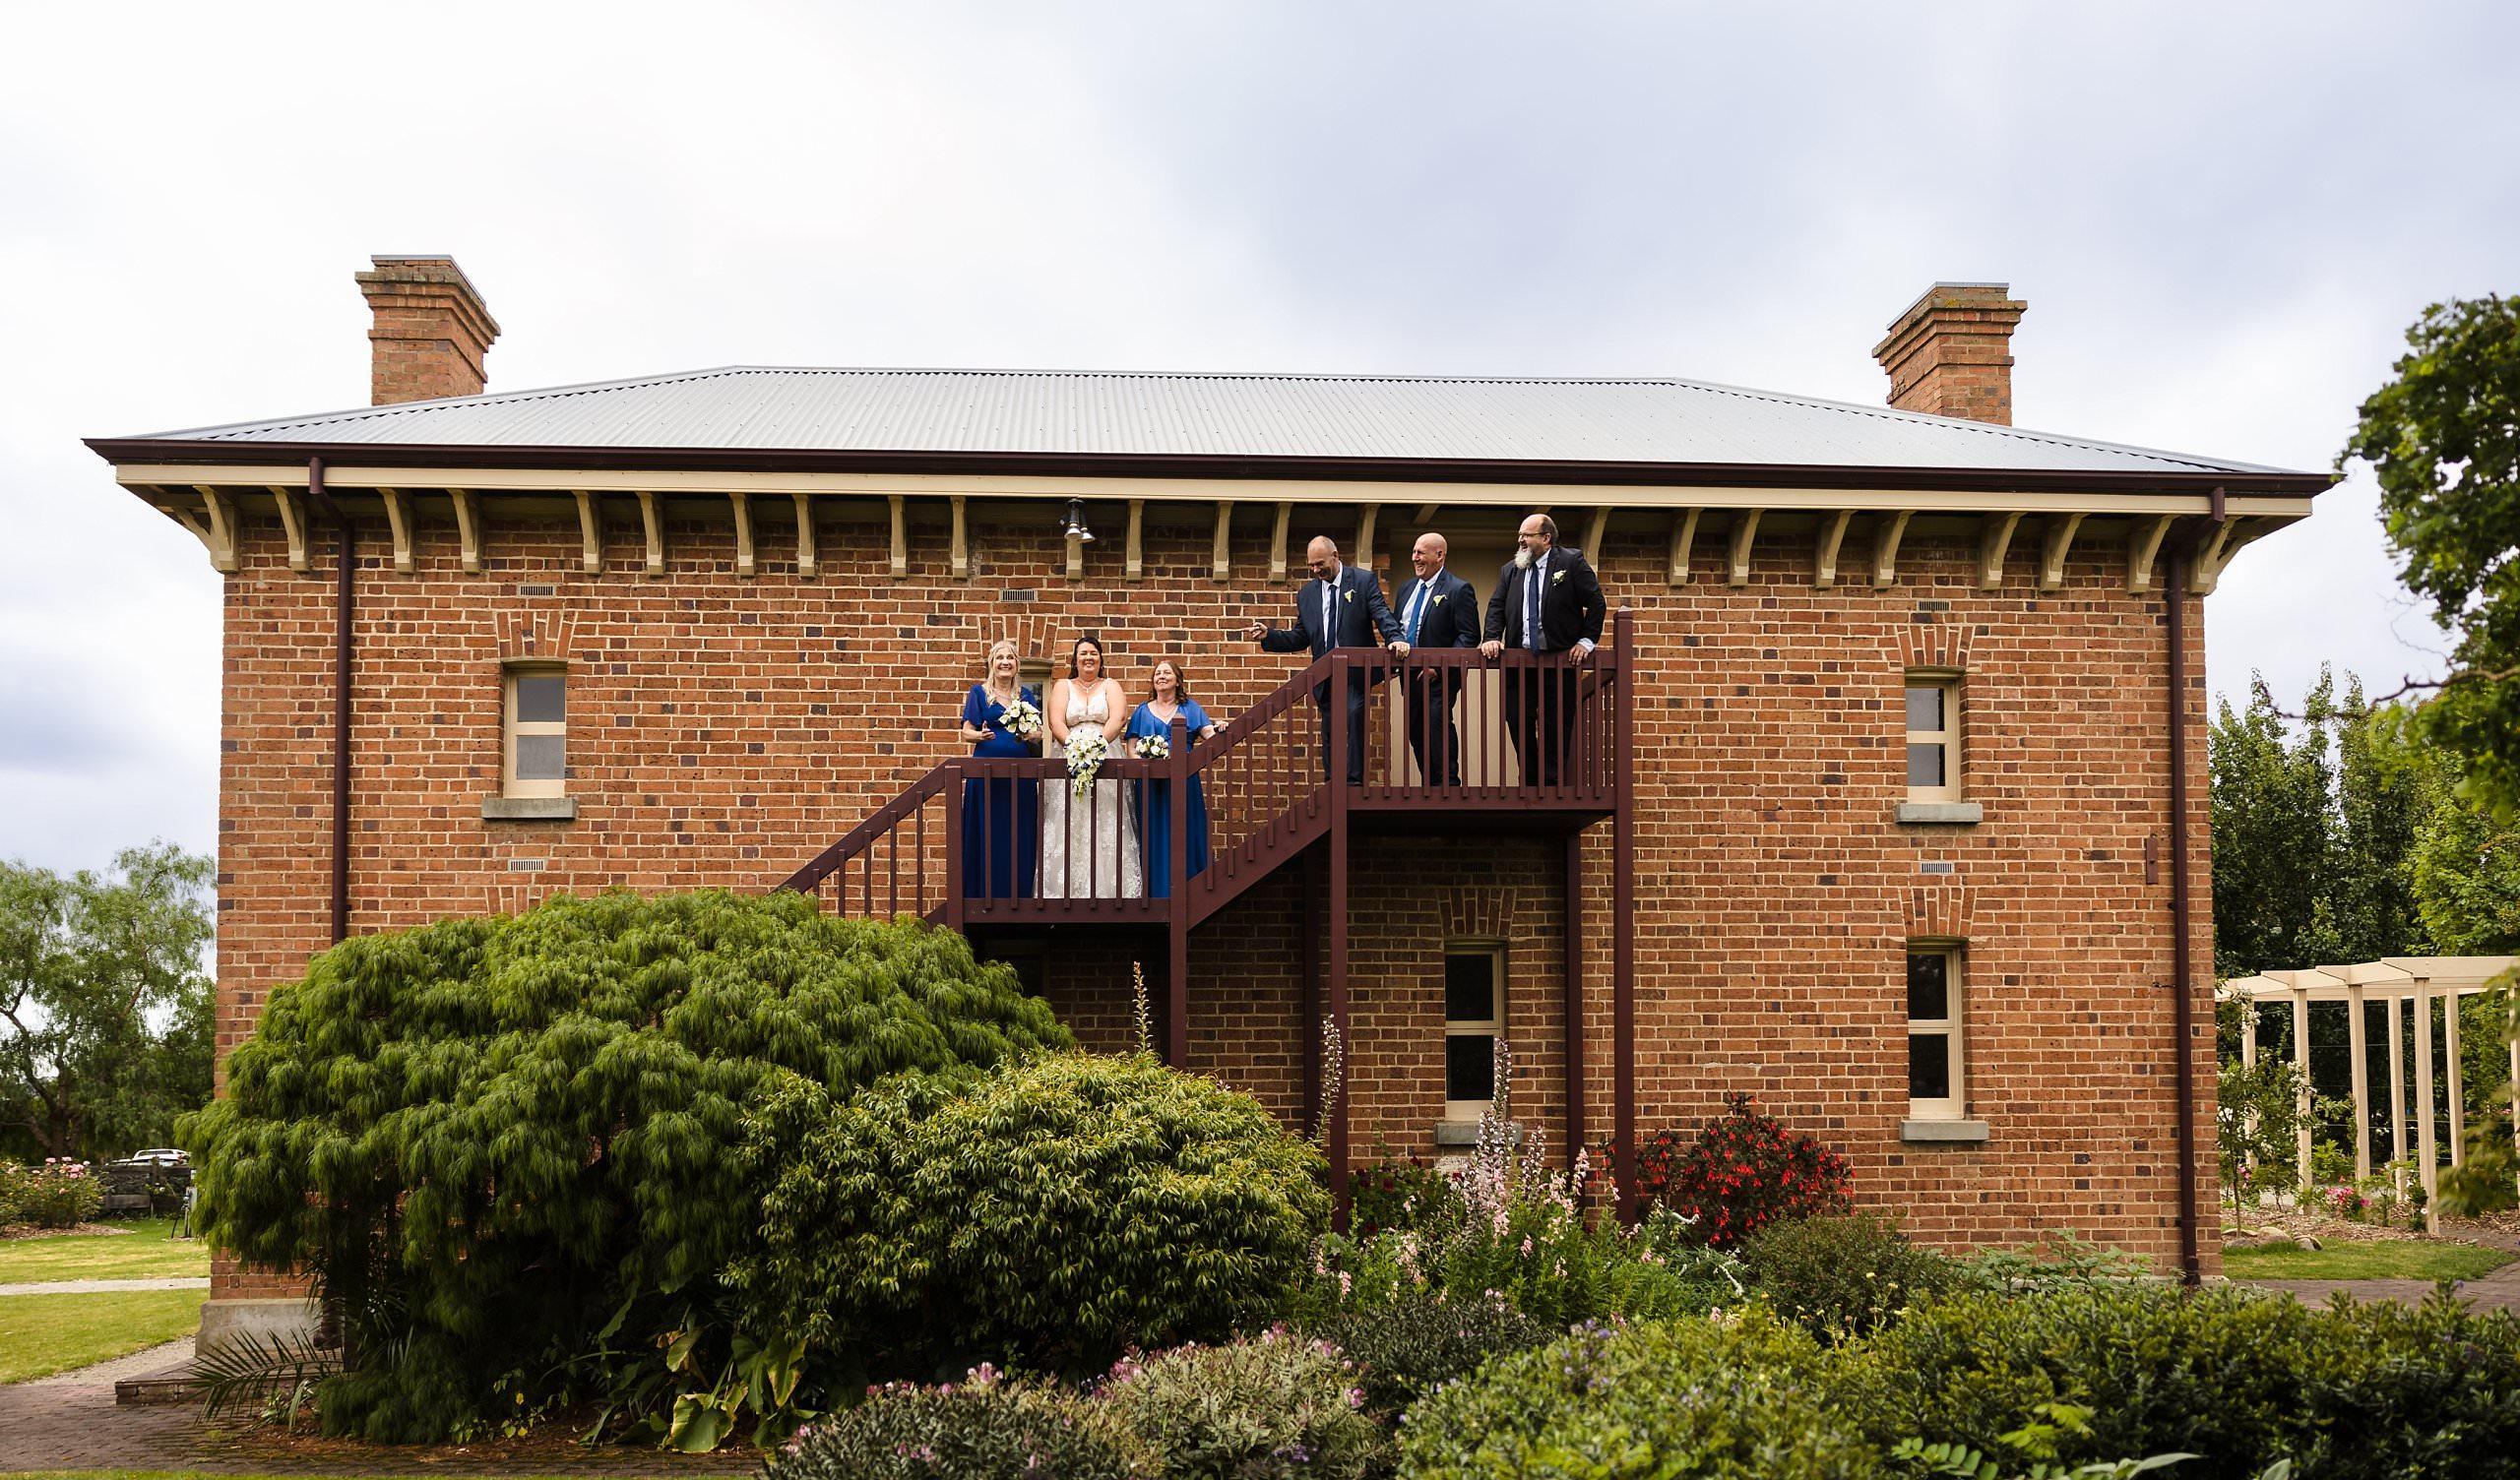 the wedding party on the stairs of the original old cheese factory wedding building